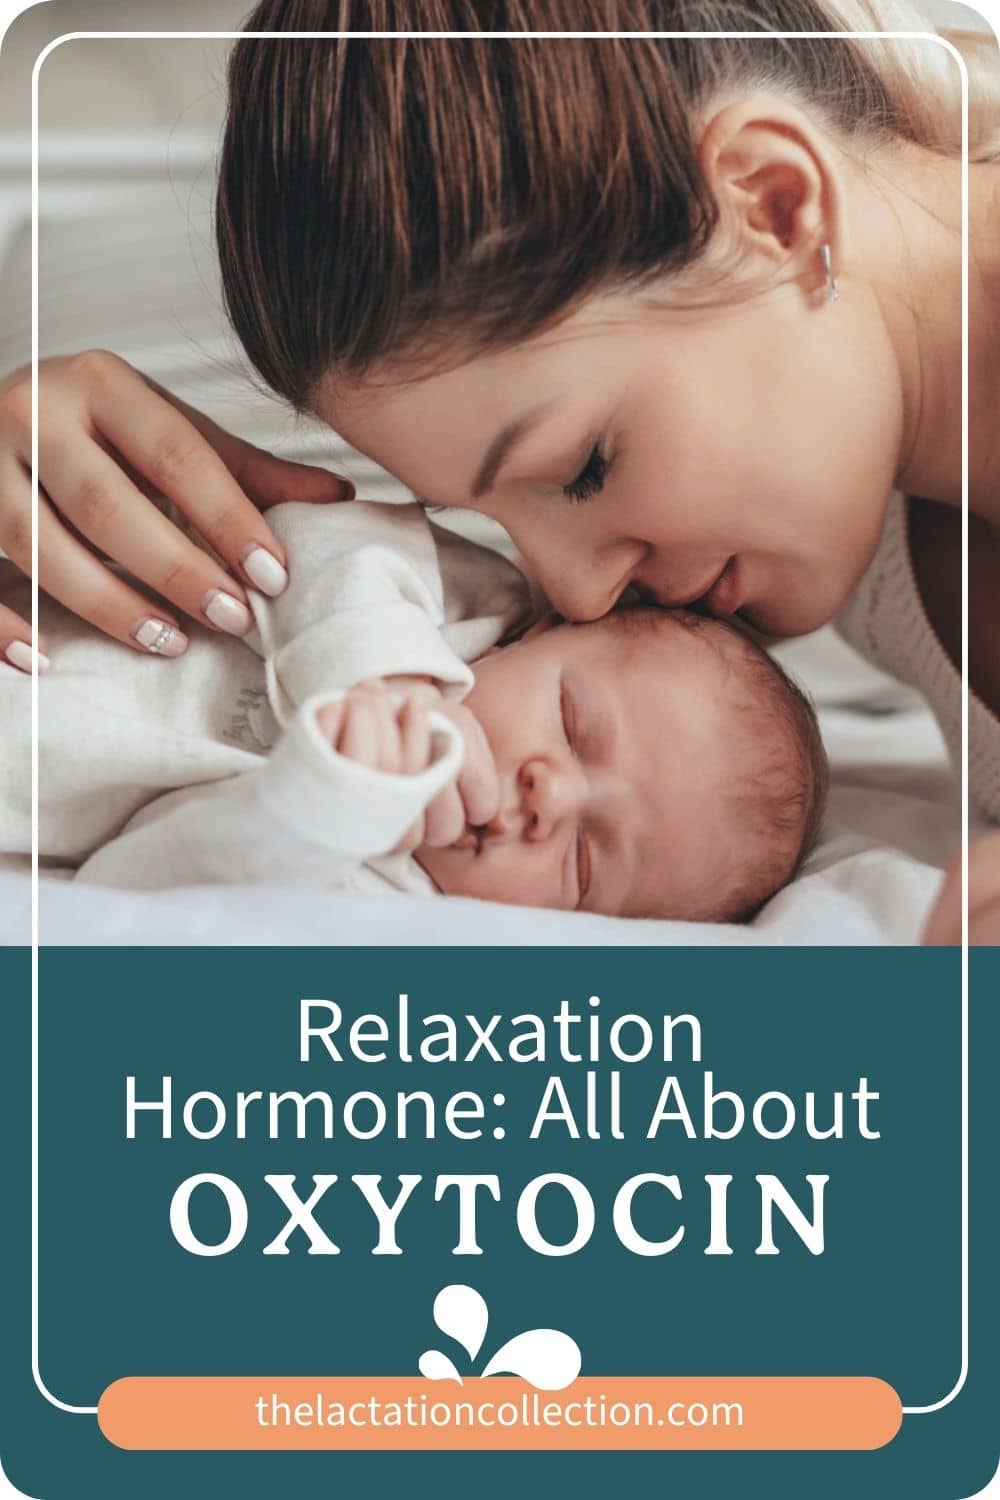 New mama smelling her baby; with text: Relaxation Hormone: All About Oxytocin